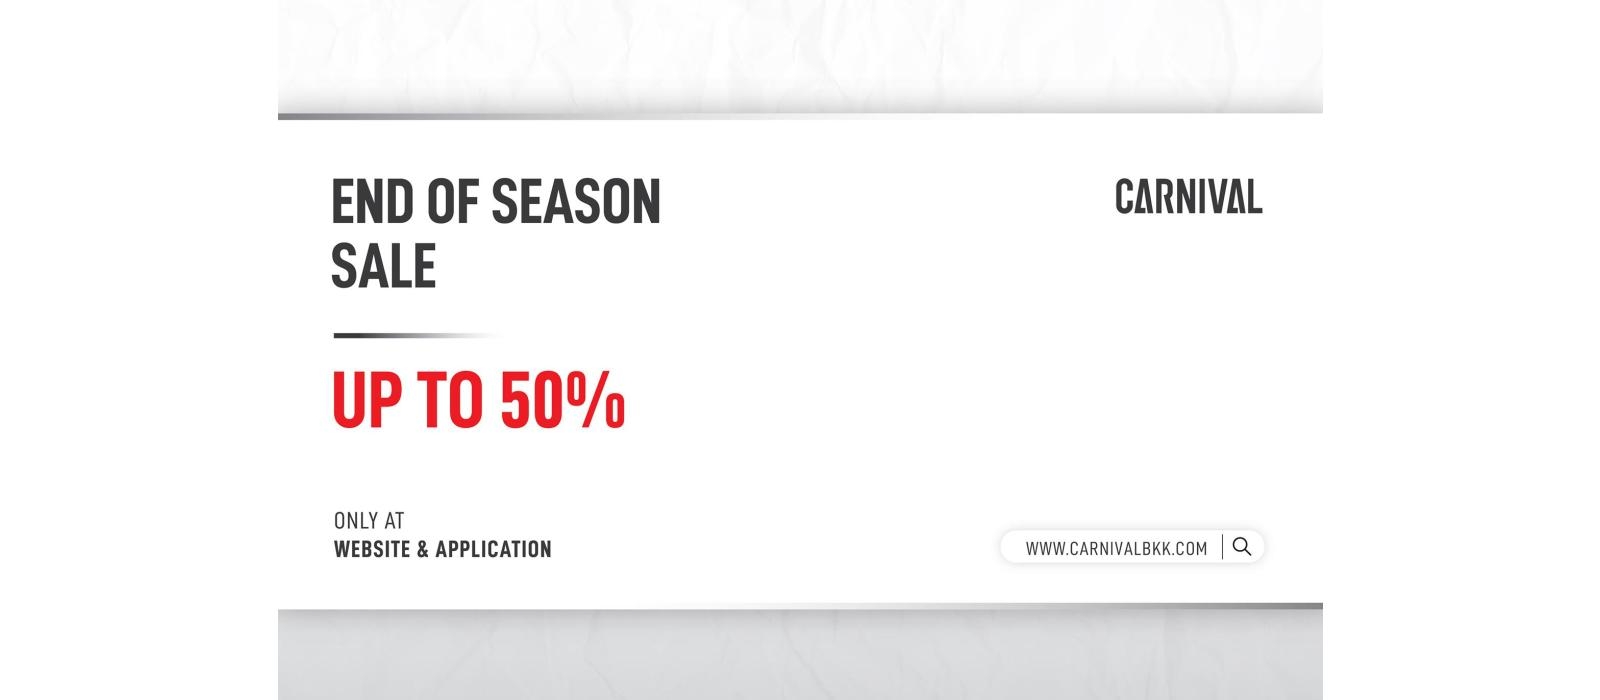 CARNIVAL END OF SEASON SALE UP TO 50%!